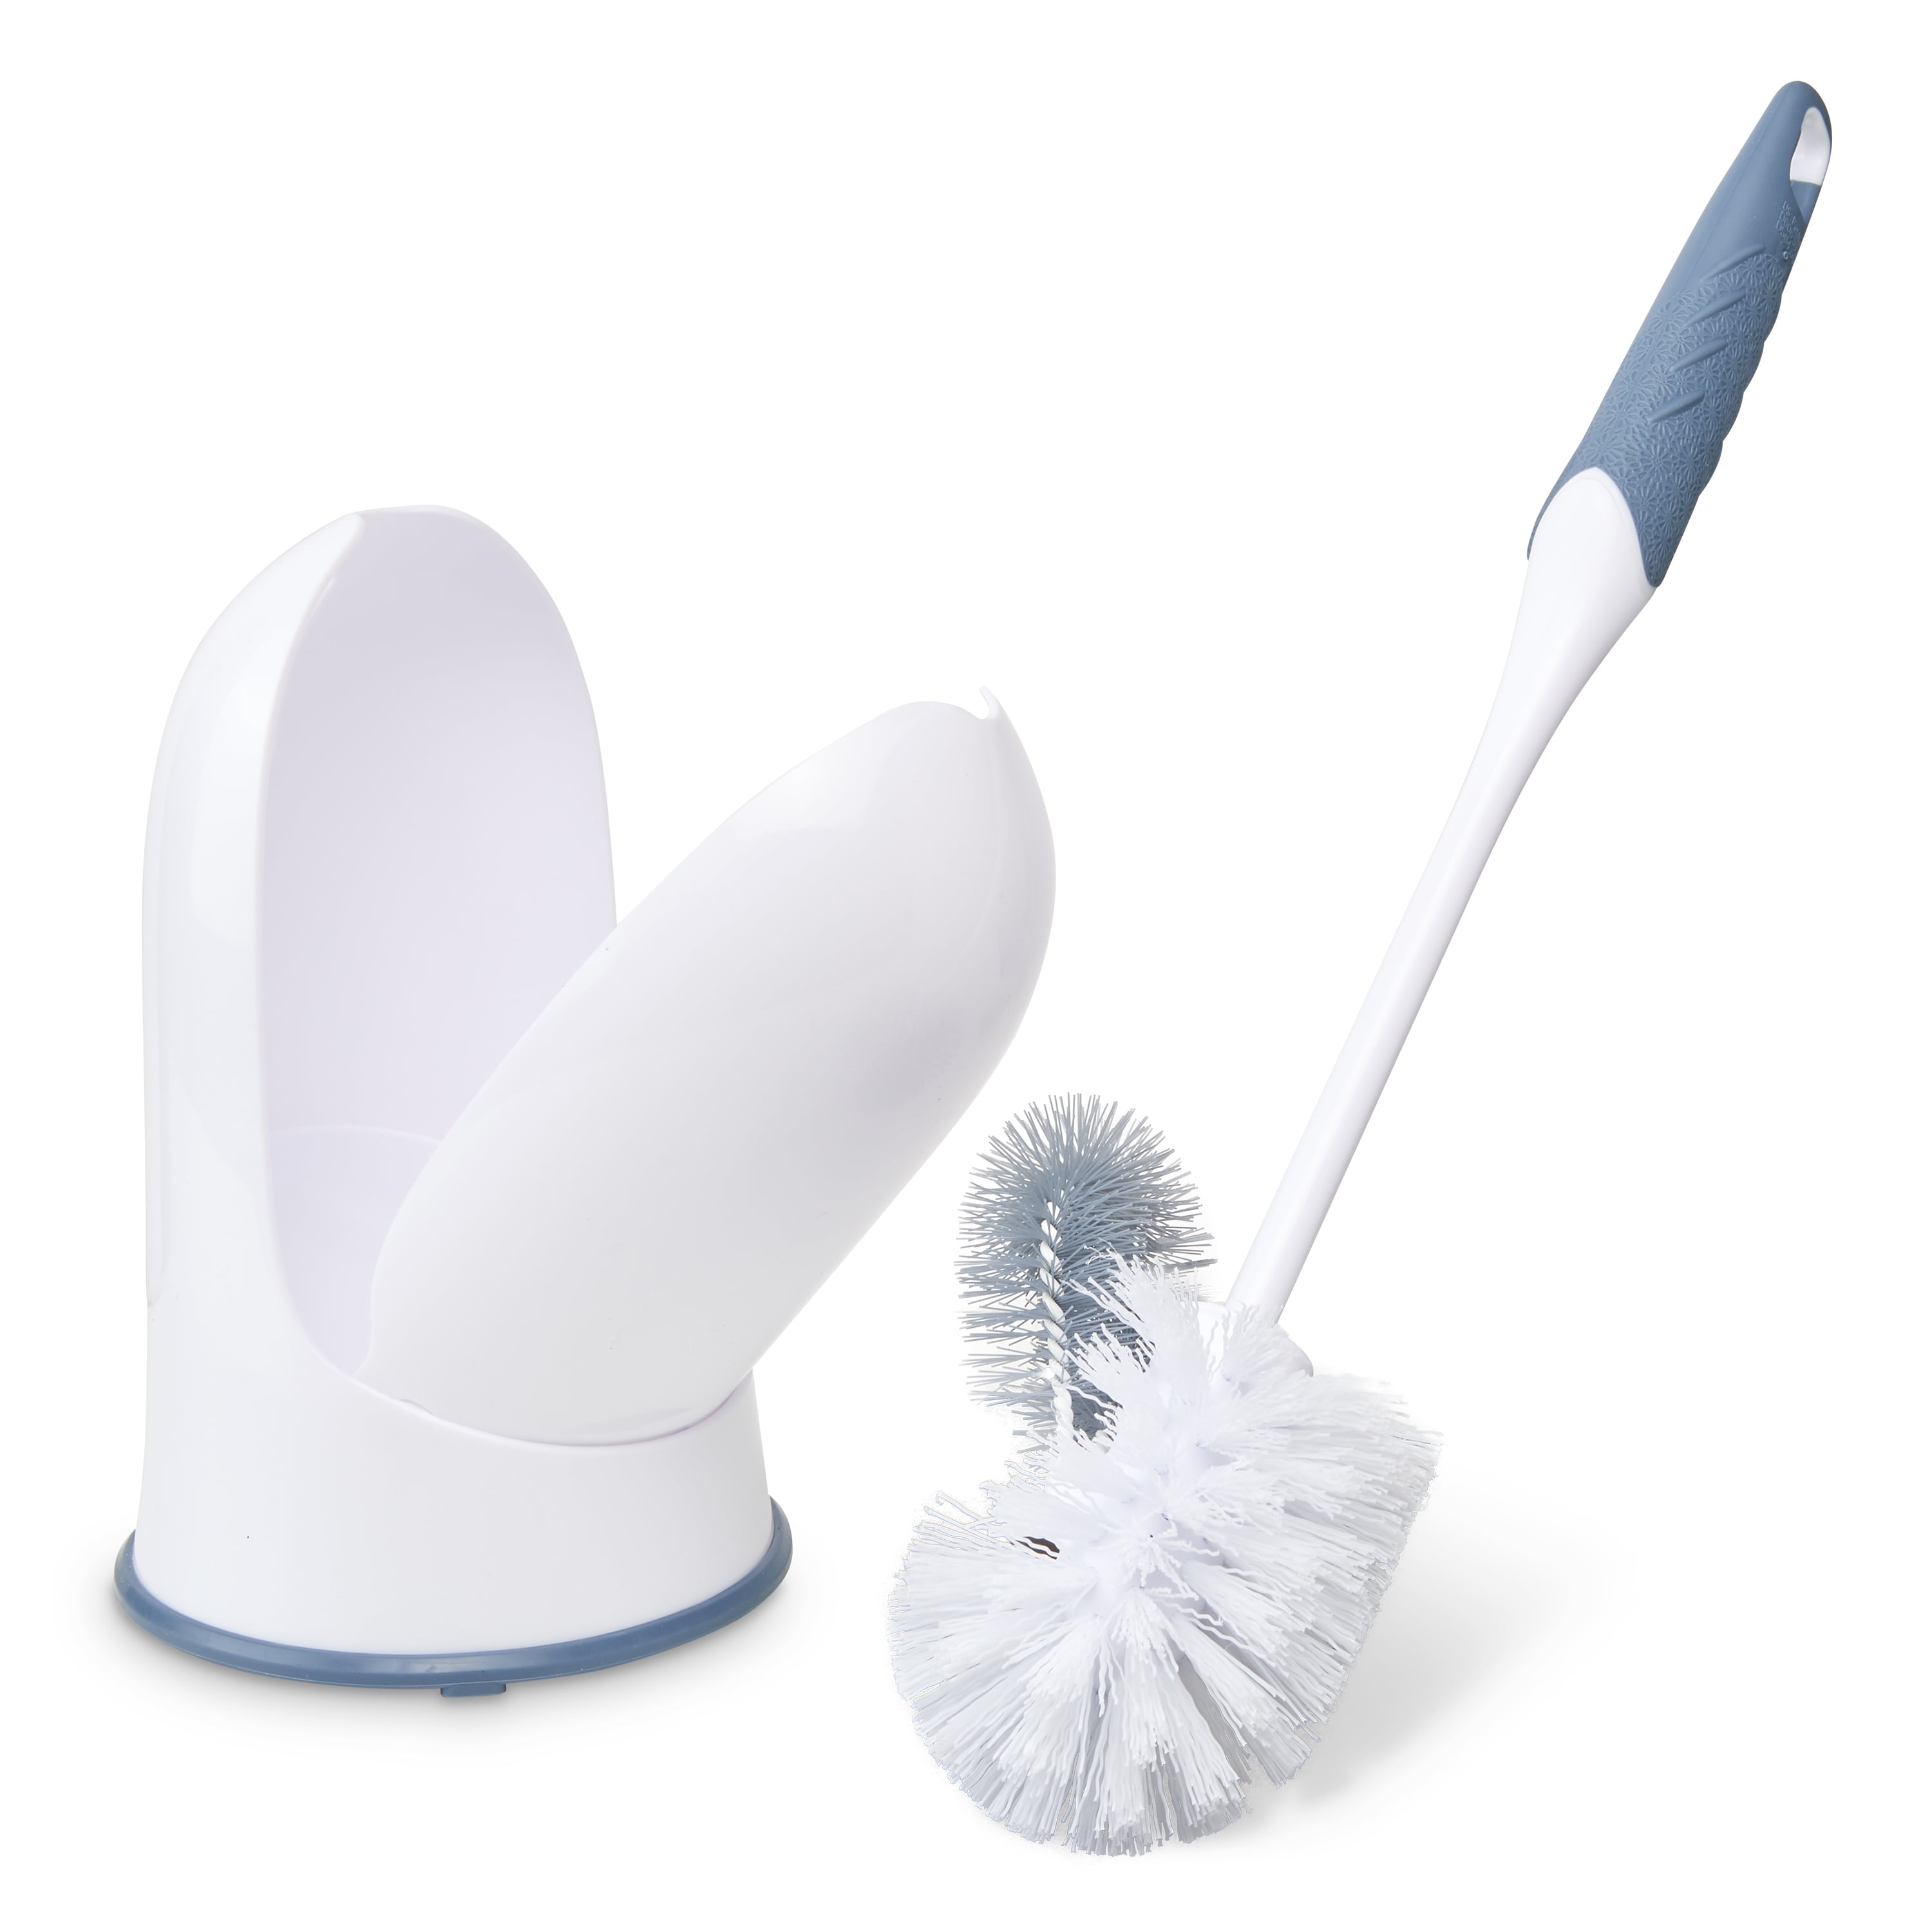 2 Count Quickie Bowl Brush & Caddy 